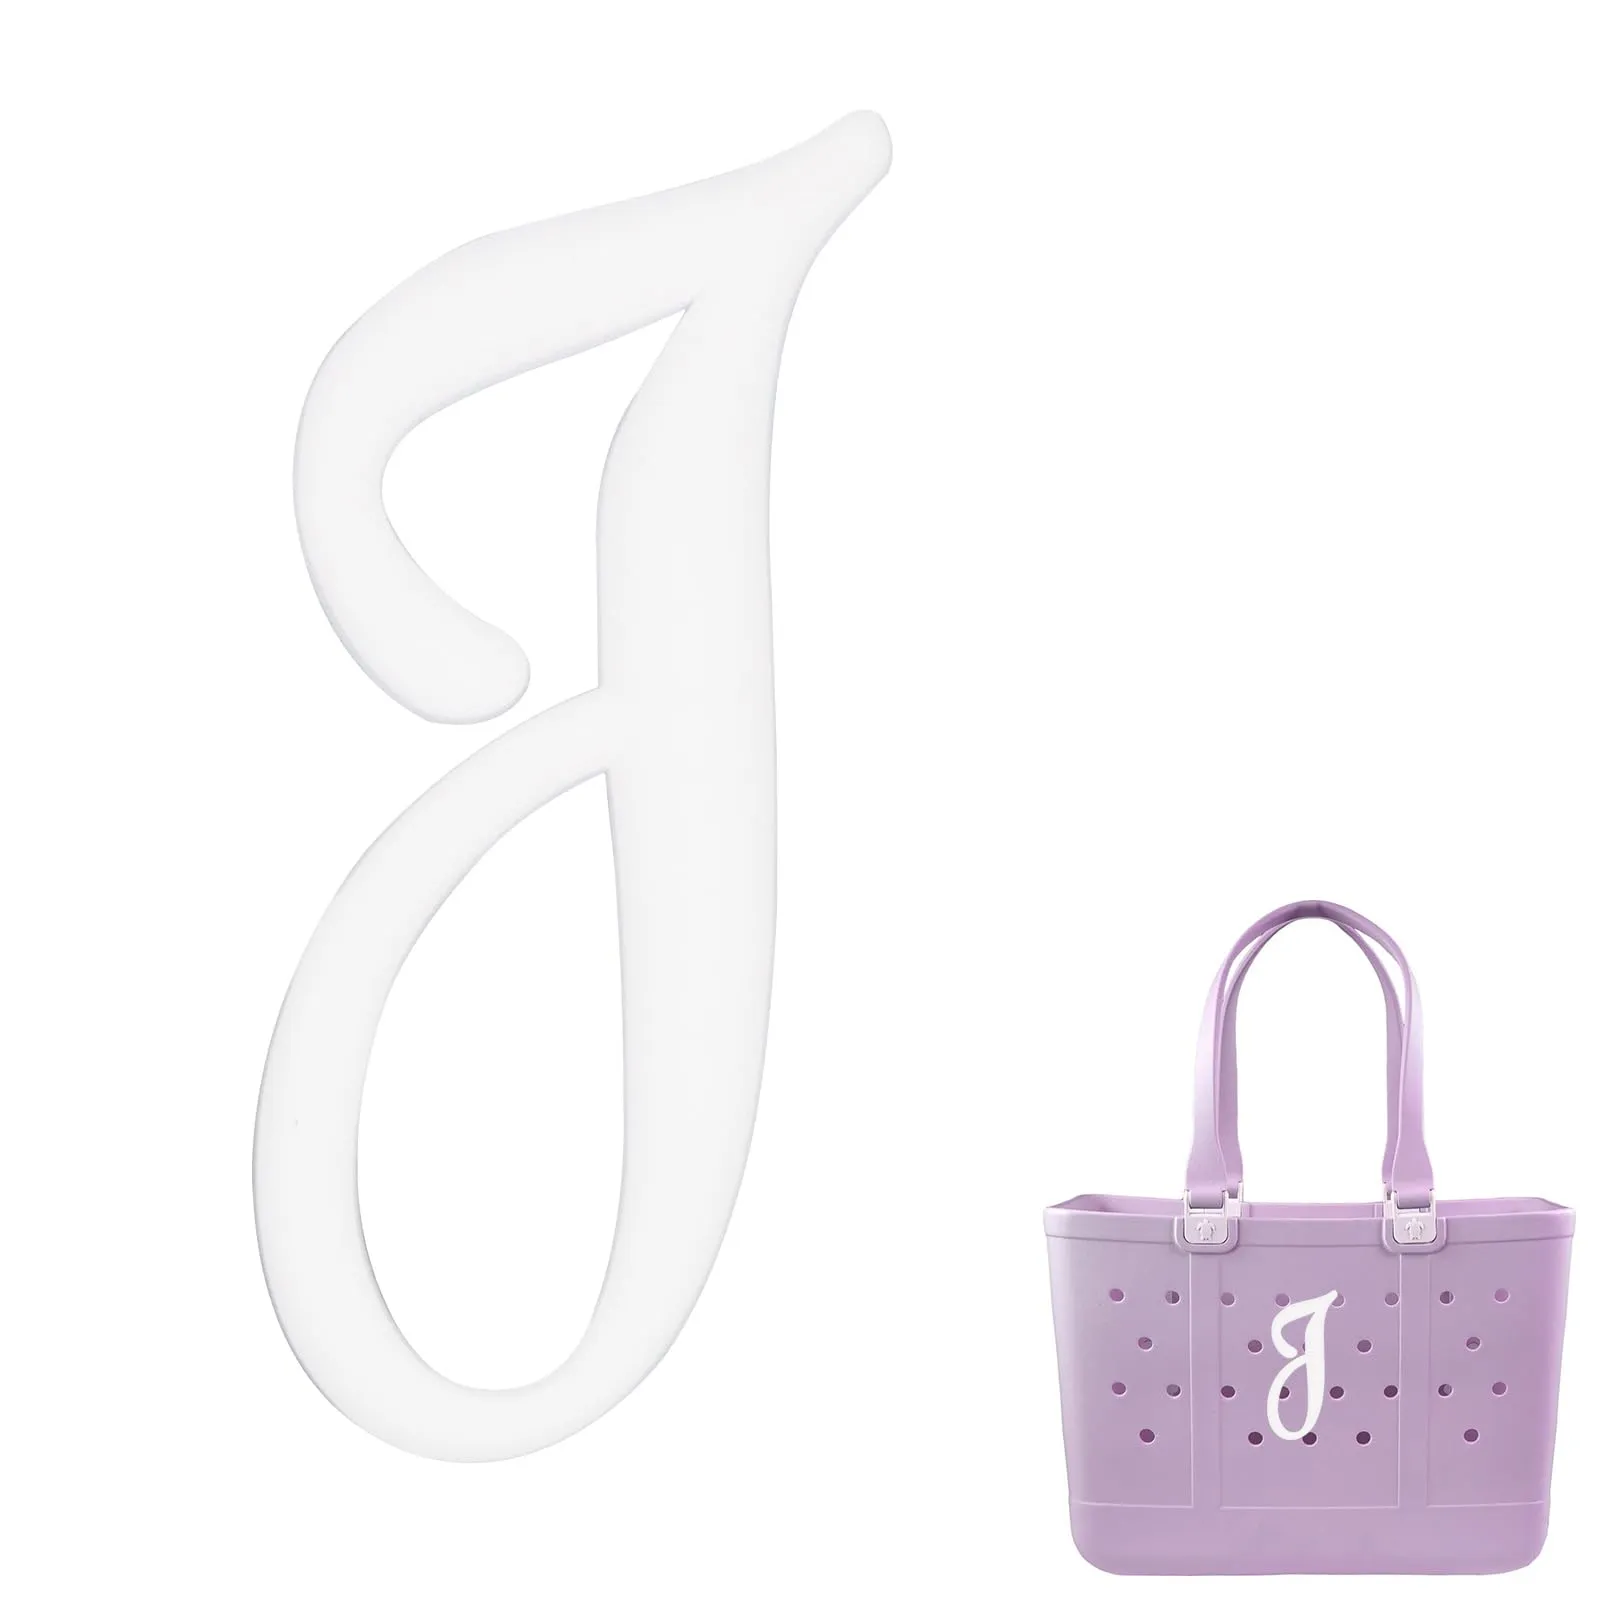 decorative alphabet letteringk accessories compatible with bogg bags charm inserts for bogg bag personalize your tote bag with alphabet letters white